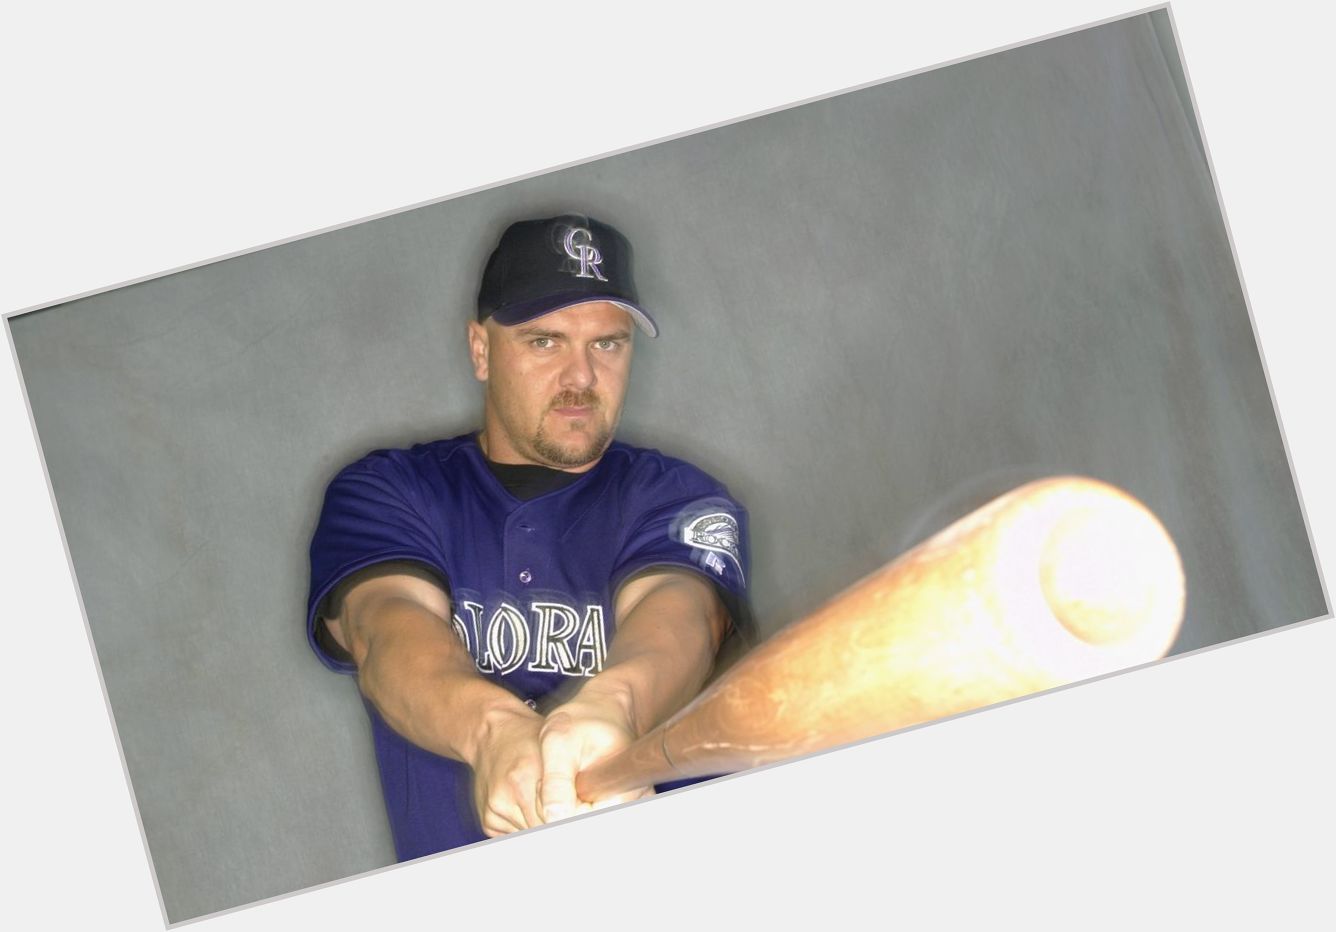 Happy birthday to the greatest player in Rockies history, Larry Walker  